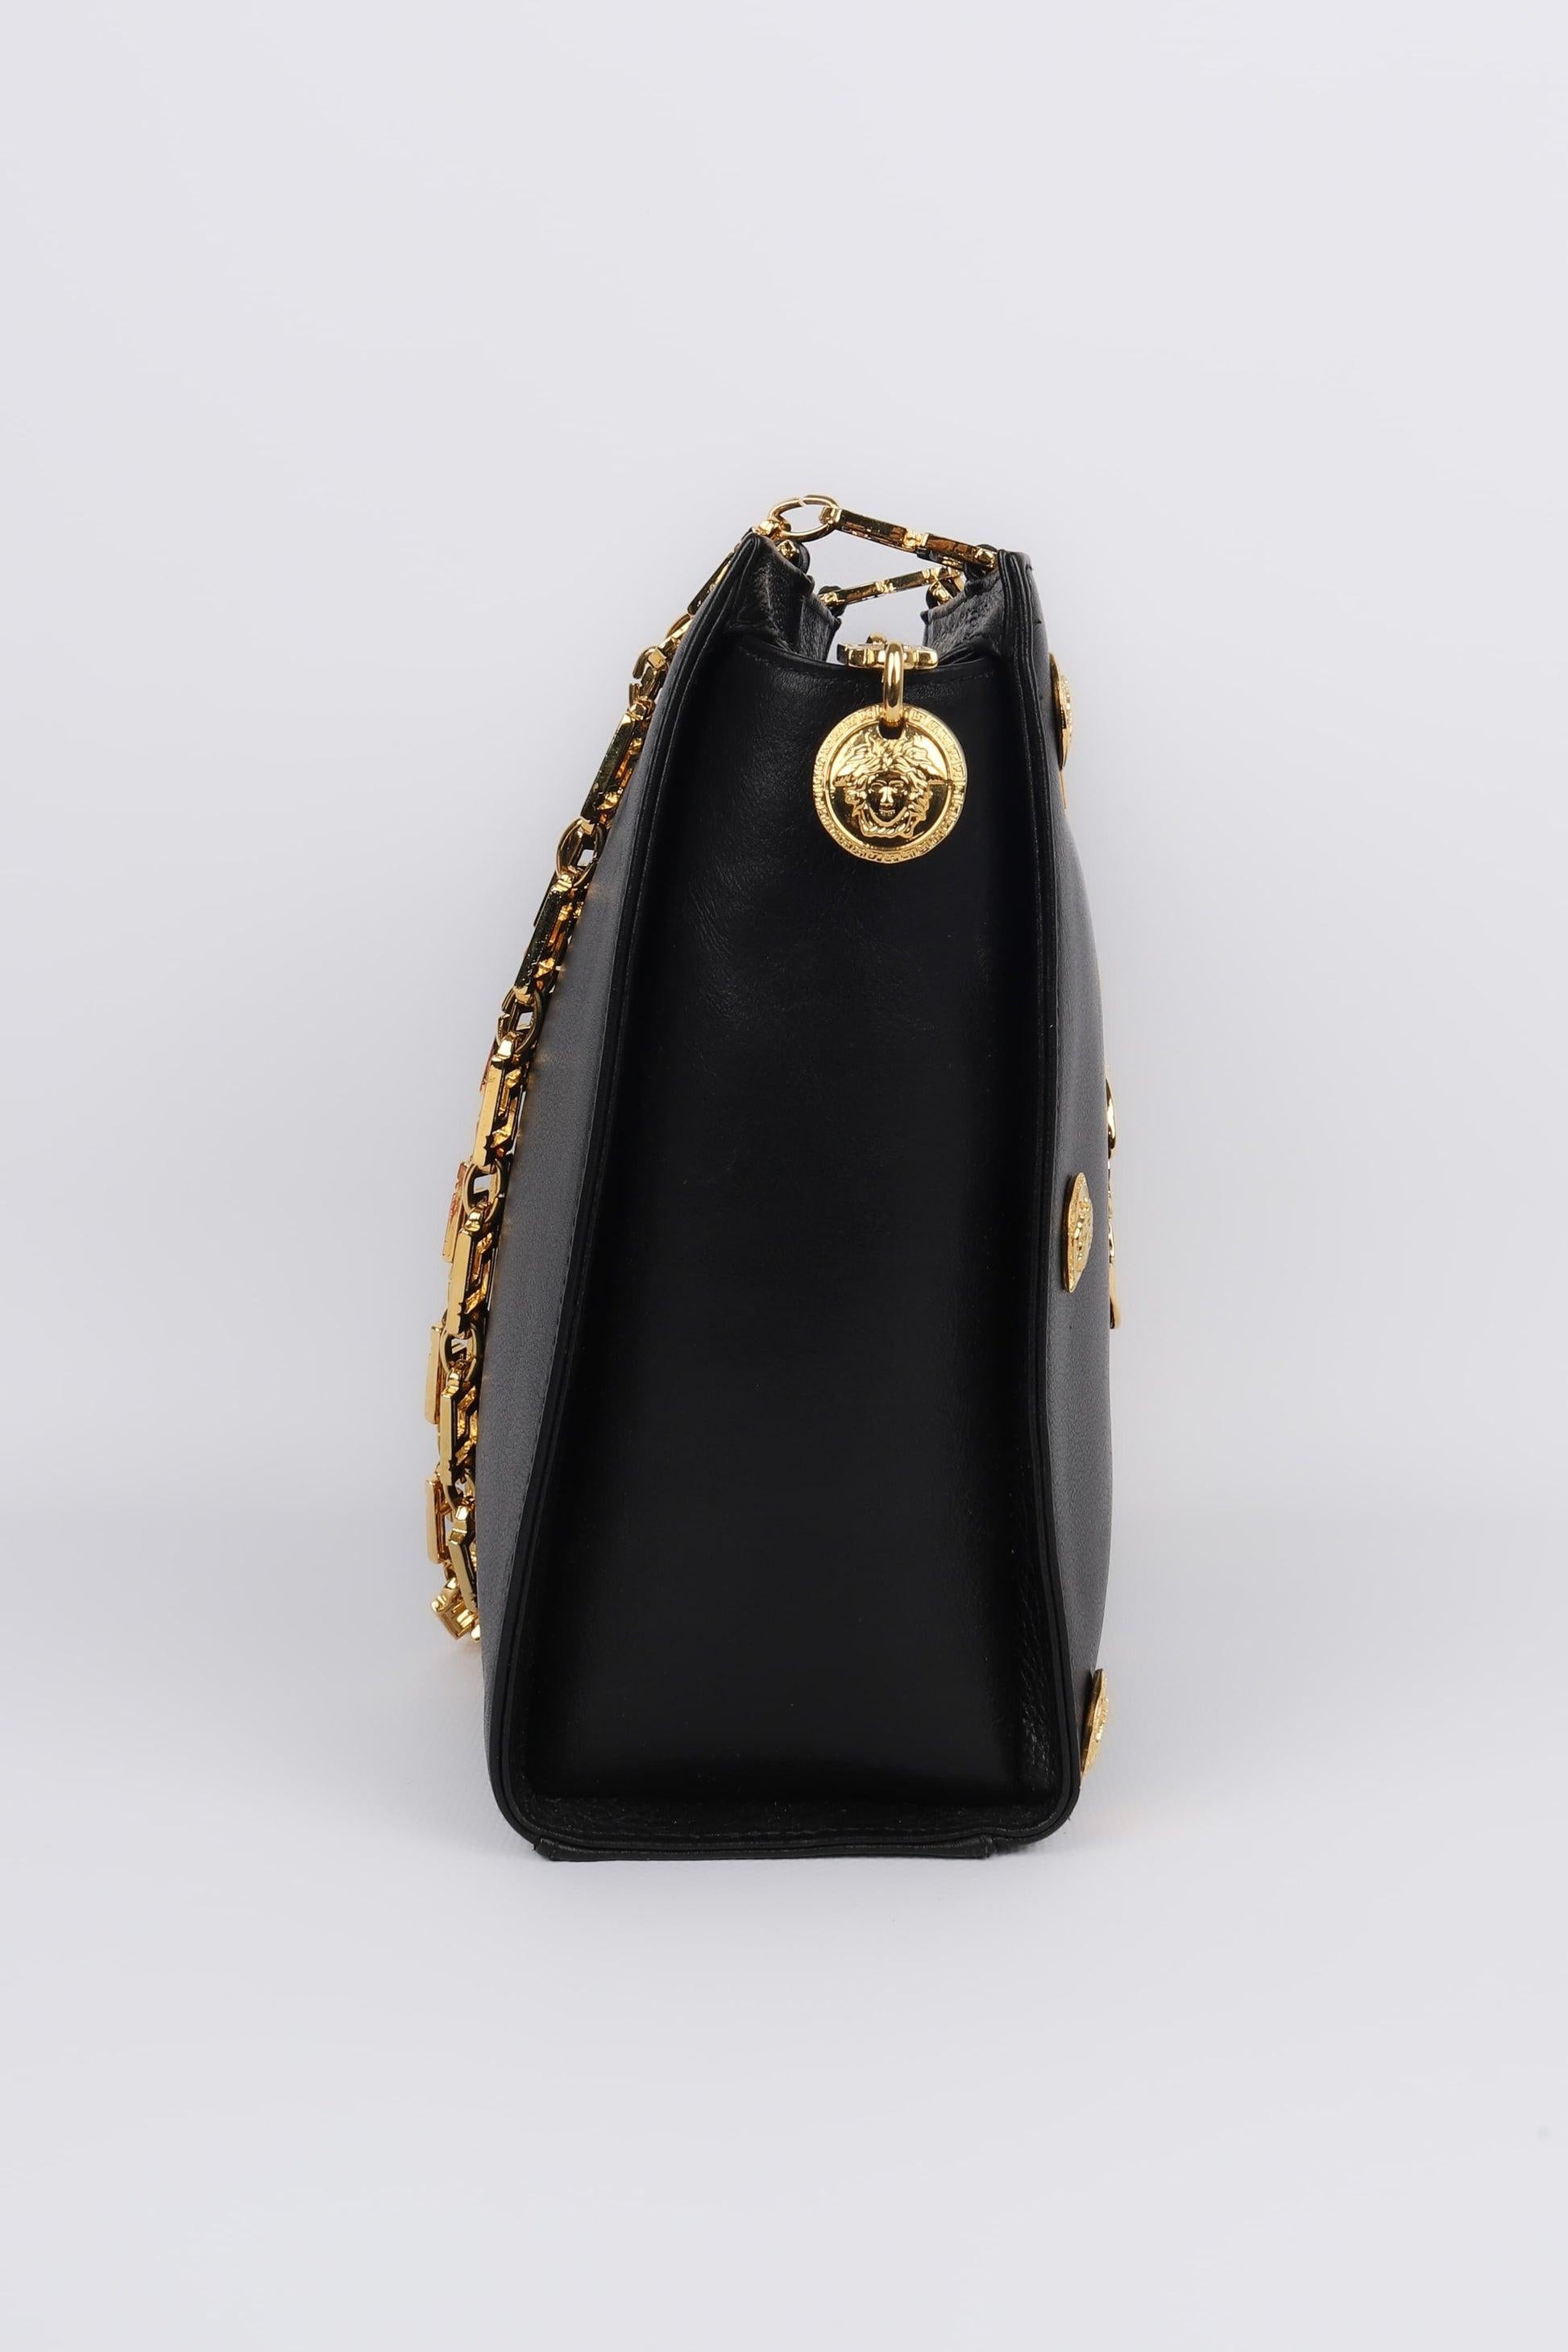 Versace -  (Made in Italy) Black leather bag with golden metal elements.

Additional information:
Condition: Very good condition
Dimensions: Length: 27 cm - Height: 22 cm - Depth: 7 cm - Handle: 97 cm

Seller Reference: S188
